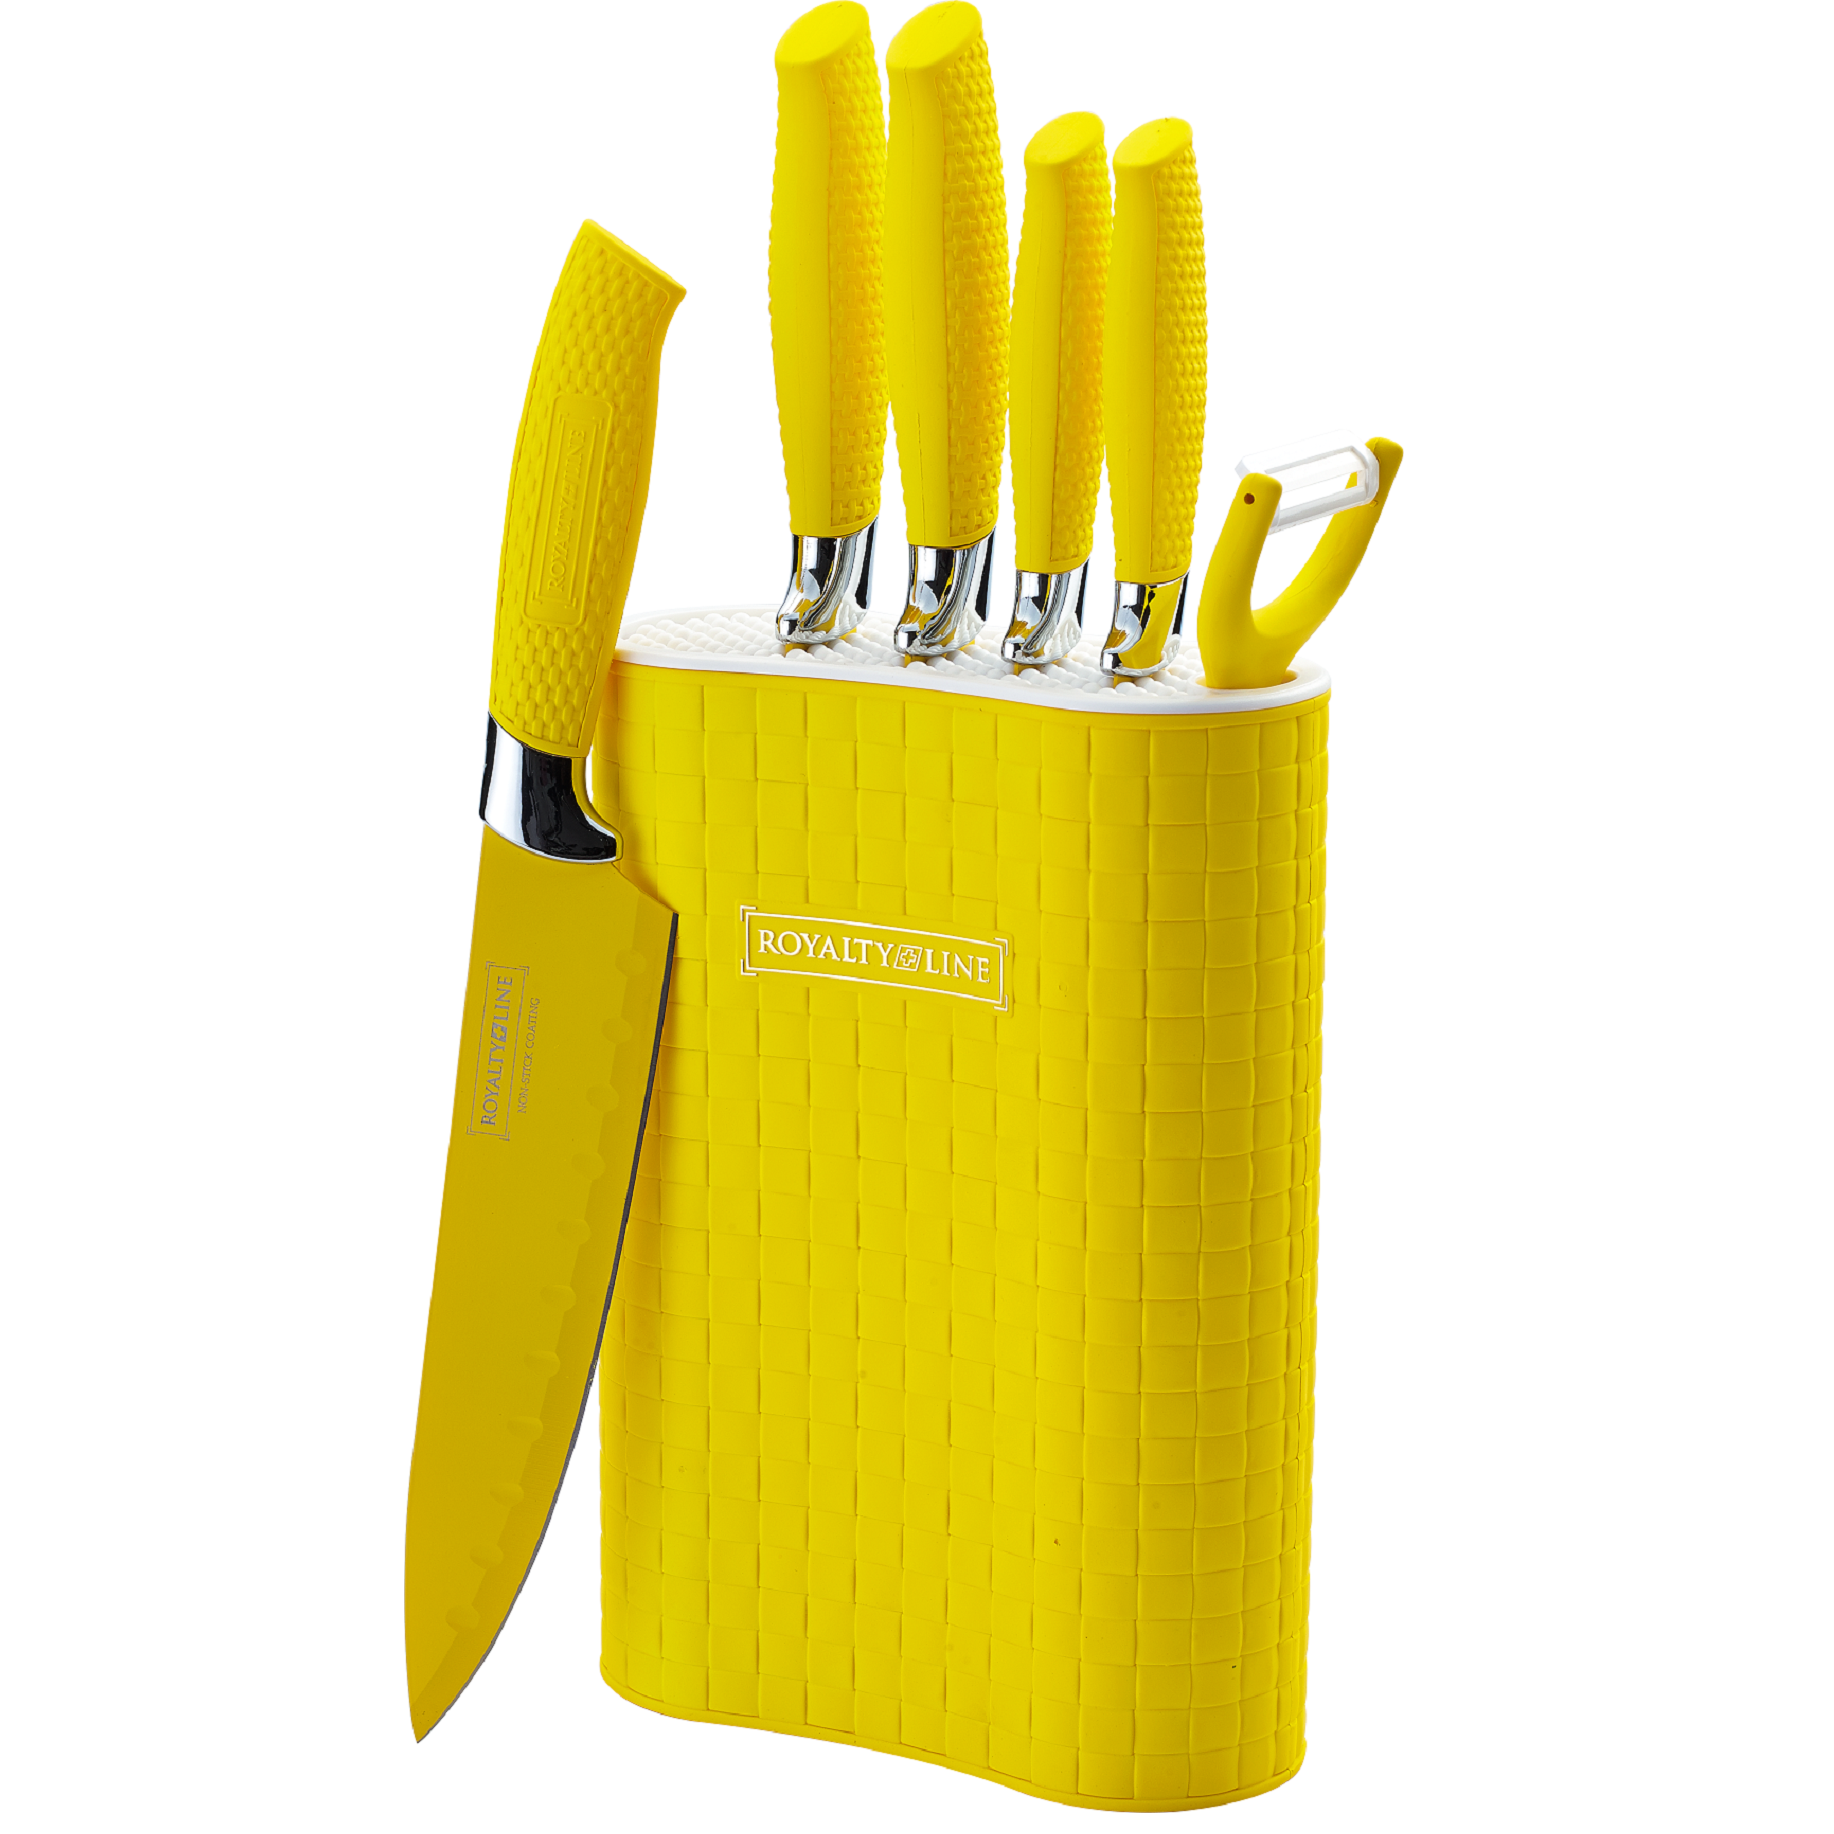 Royalty Line 6 Piece Non-Stick Coating Knife Set with Stand - Yellow